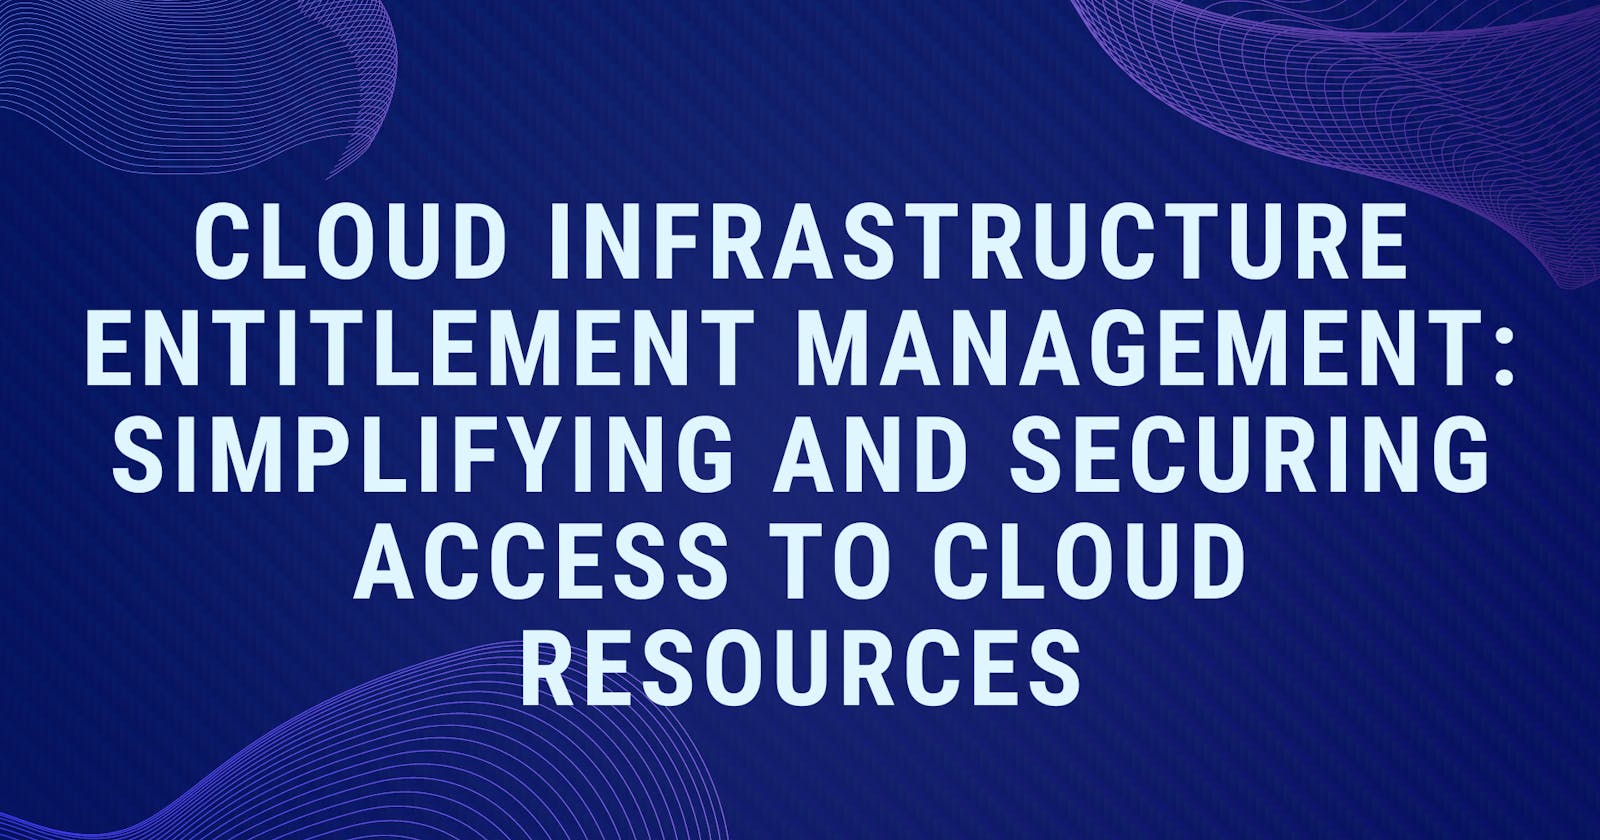 Cloud Infrastructure Entitlement Management: Simplifying and Securing Access to Cloud Resources